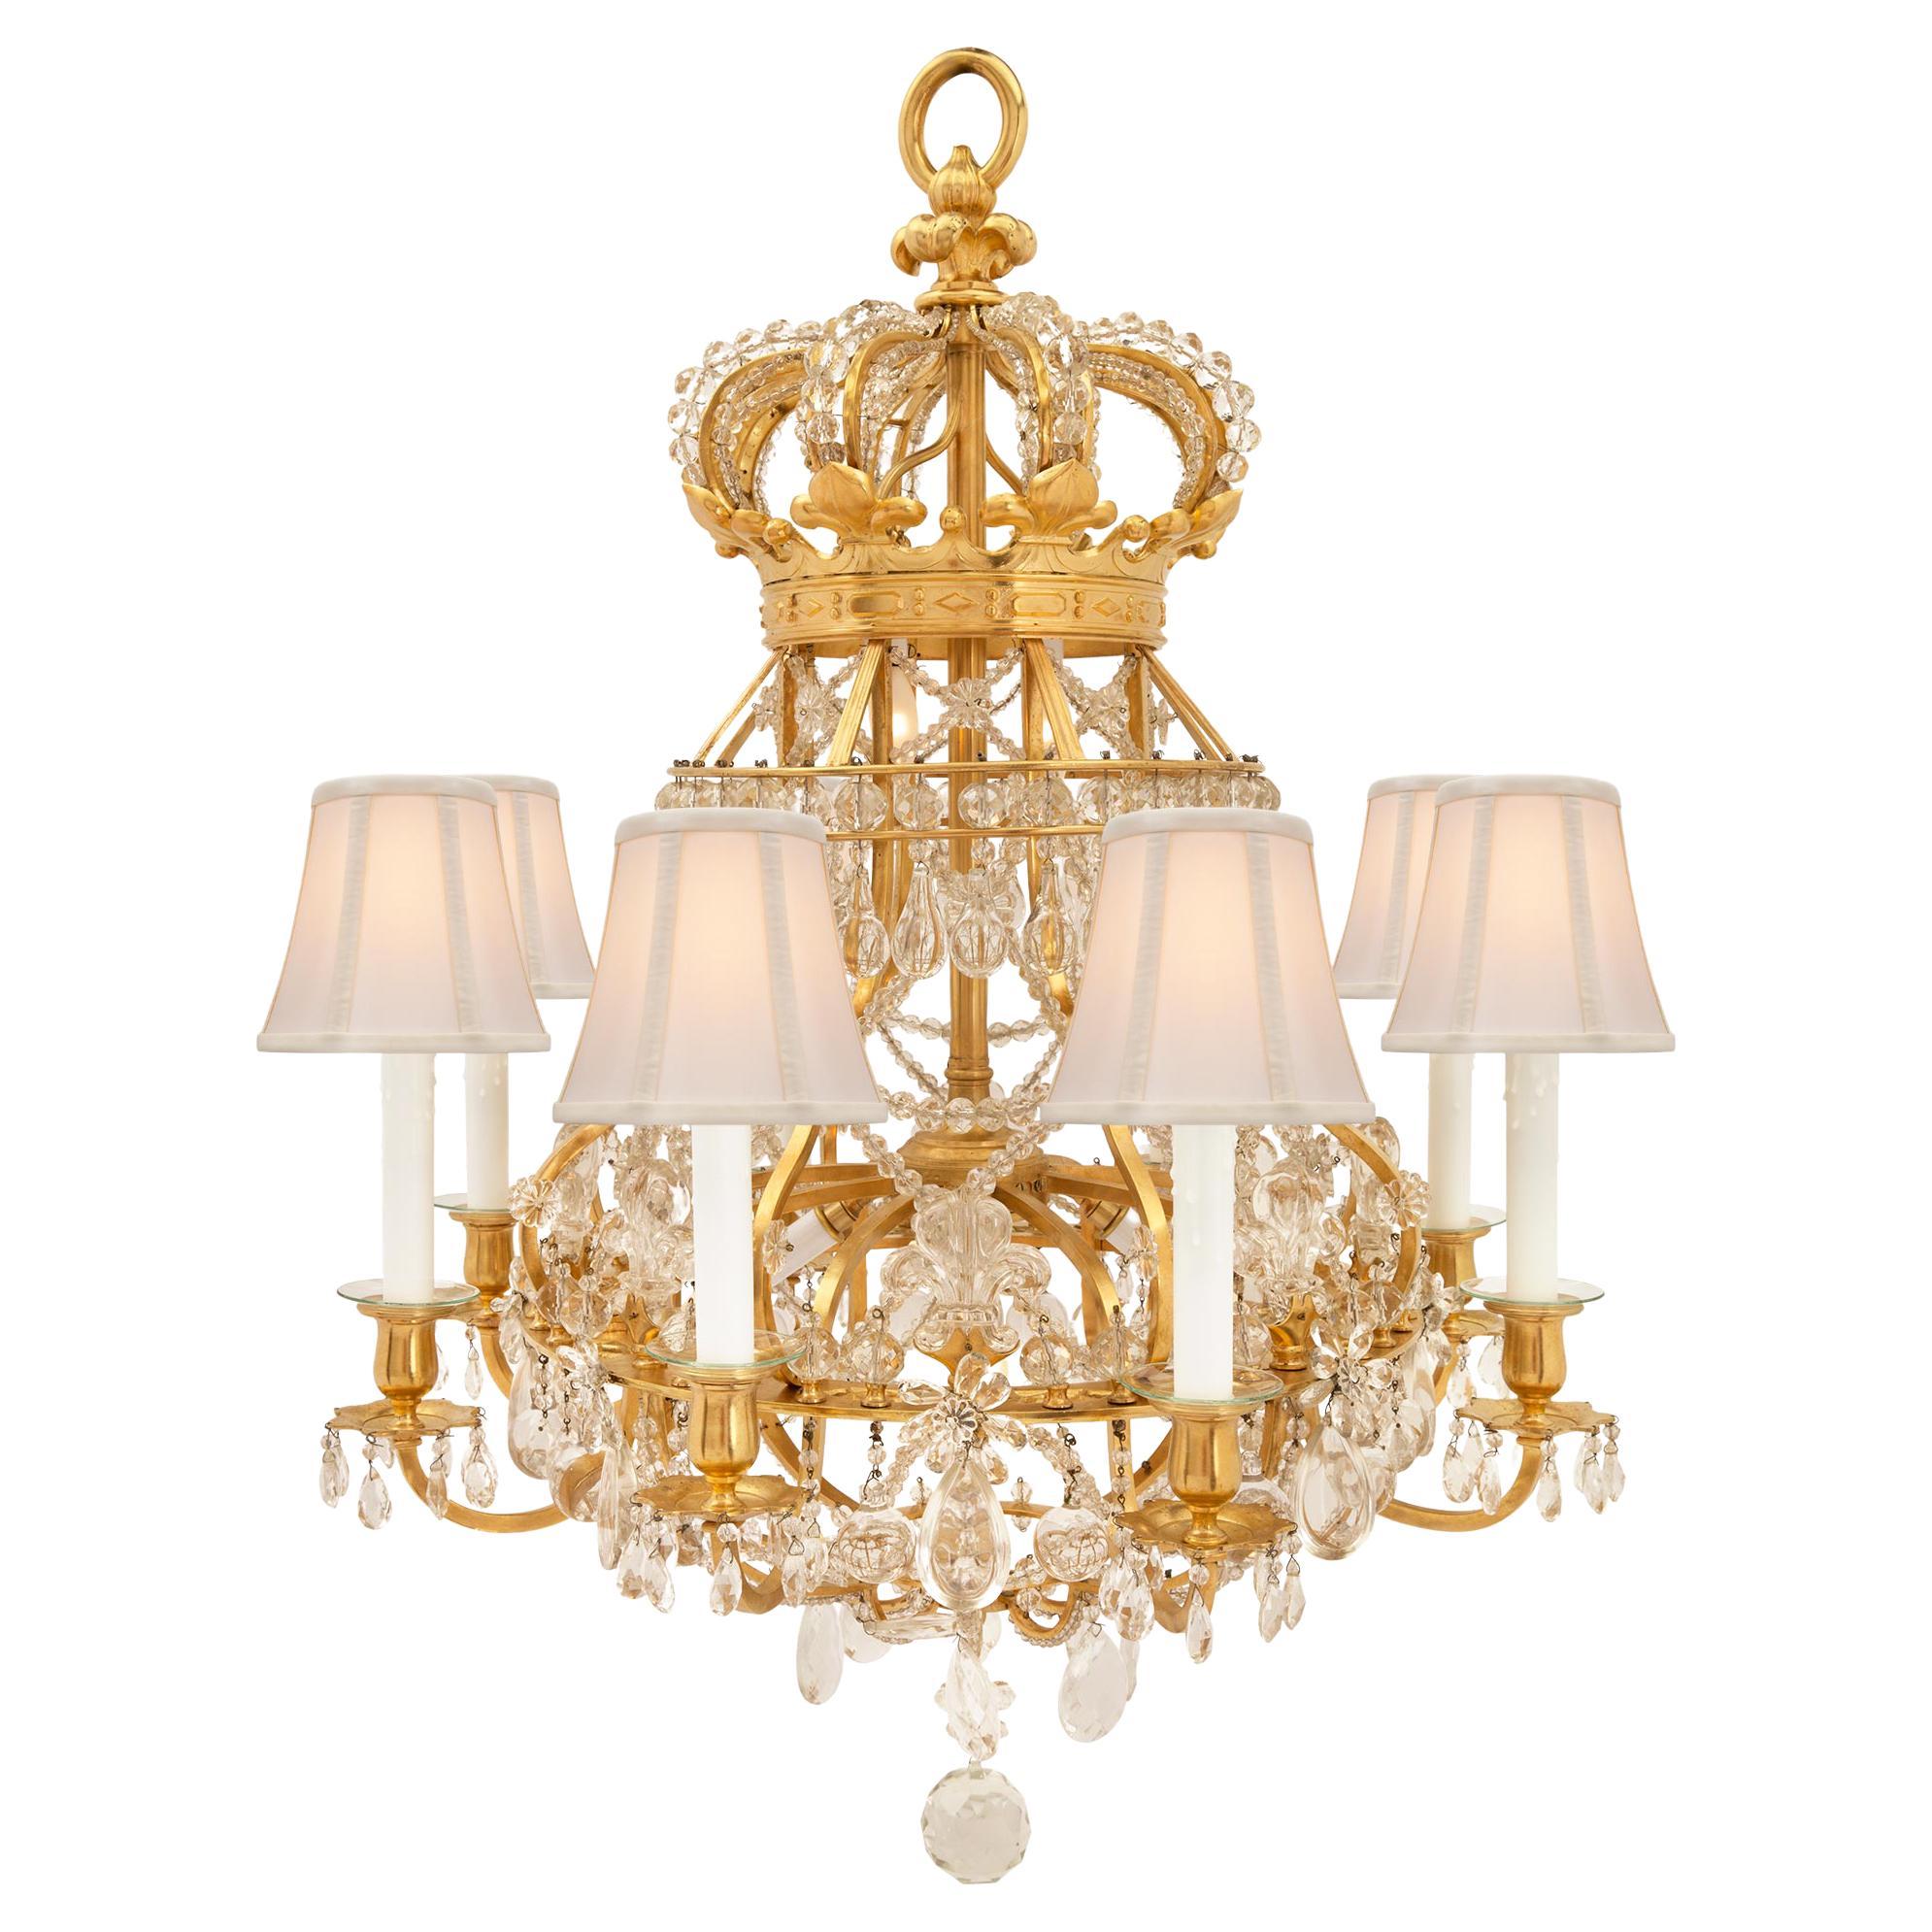 French 19th Century Louis XIV Style Ormolu, Crystal and Glass Royal Chandelier